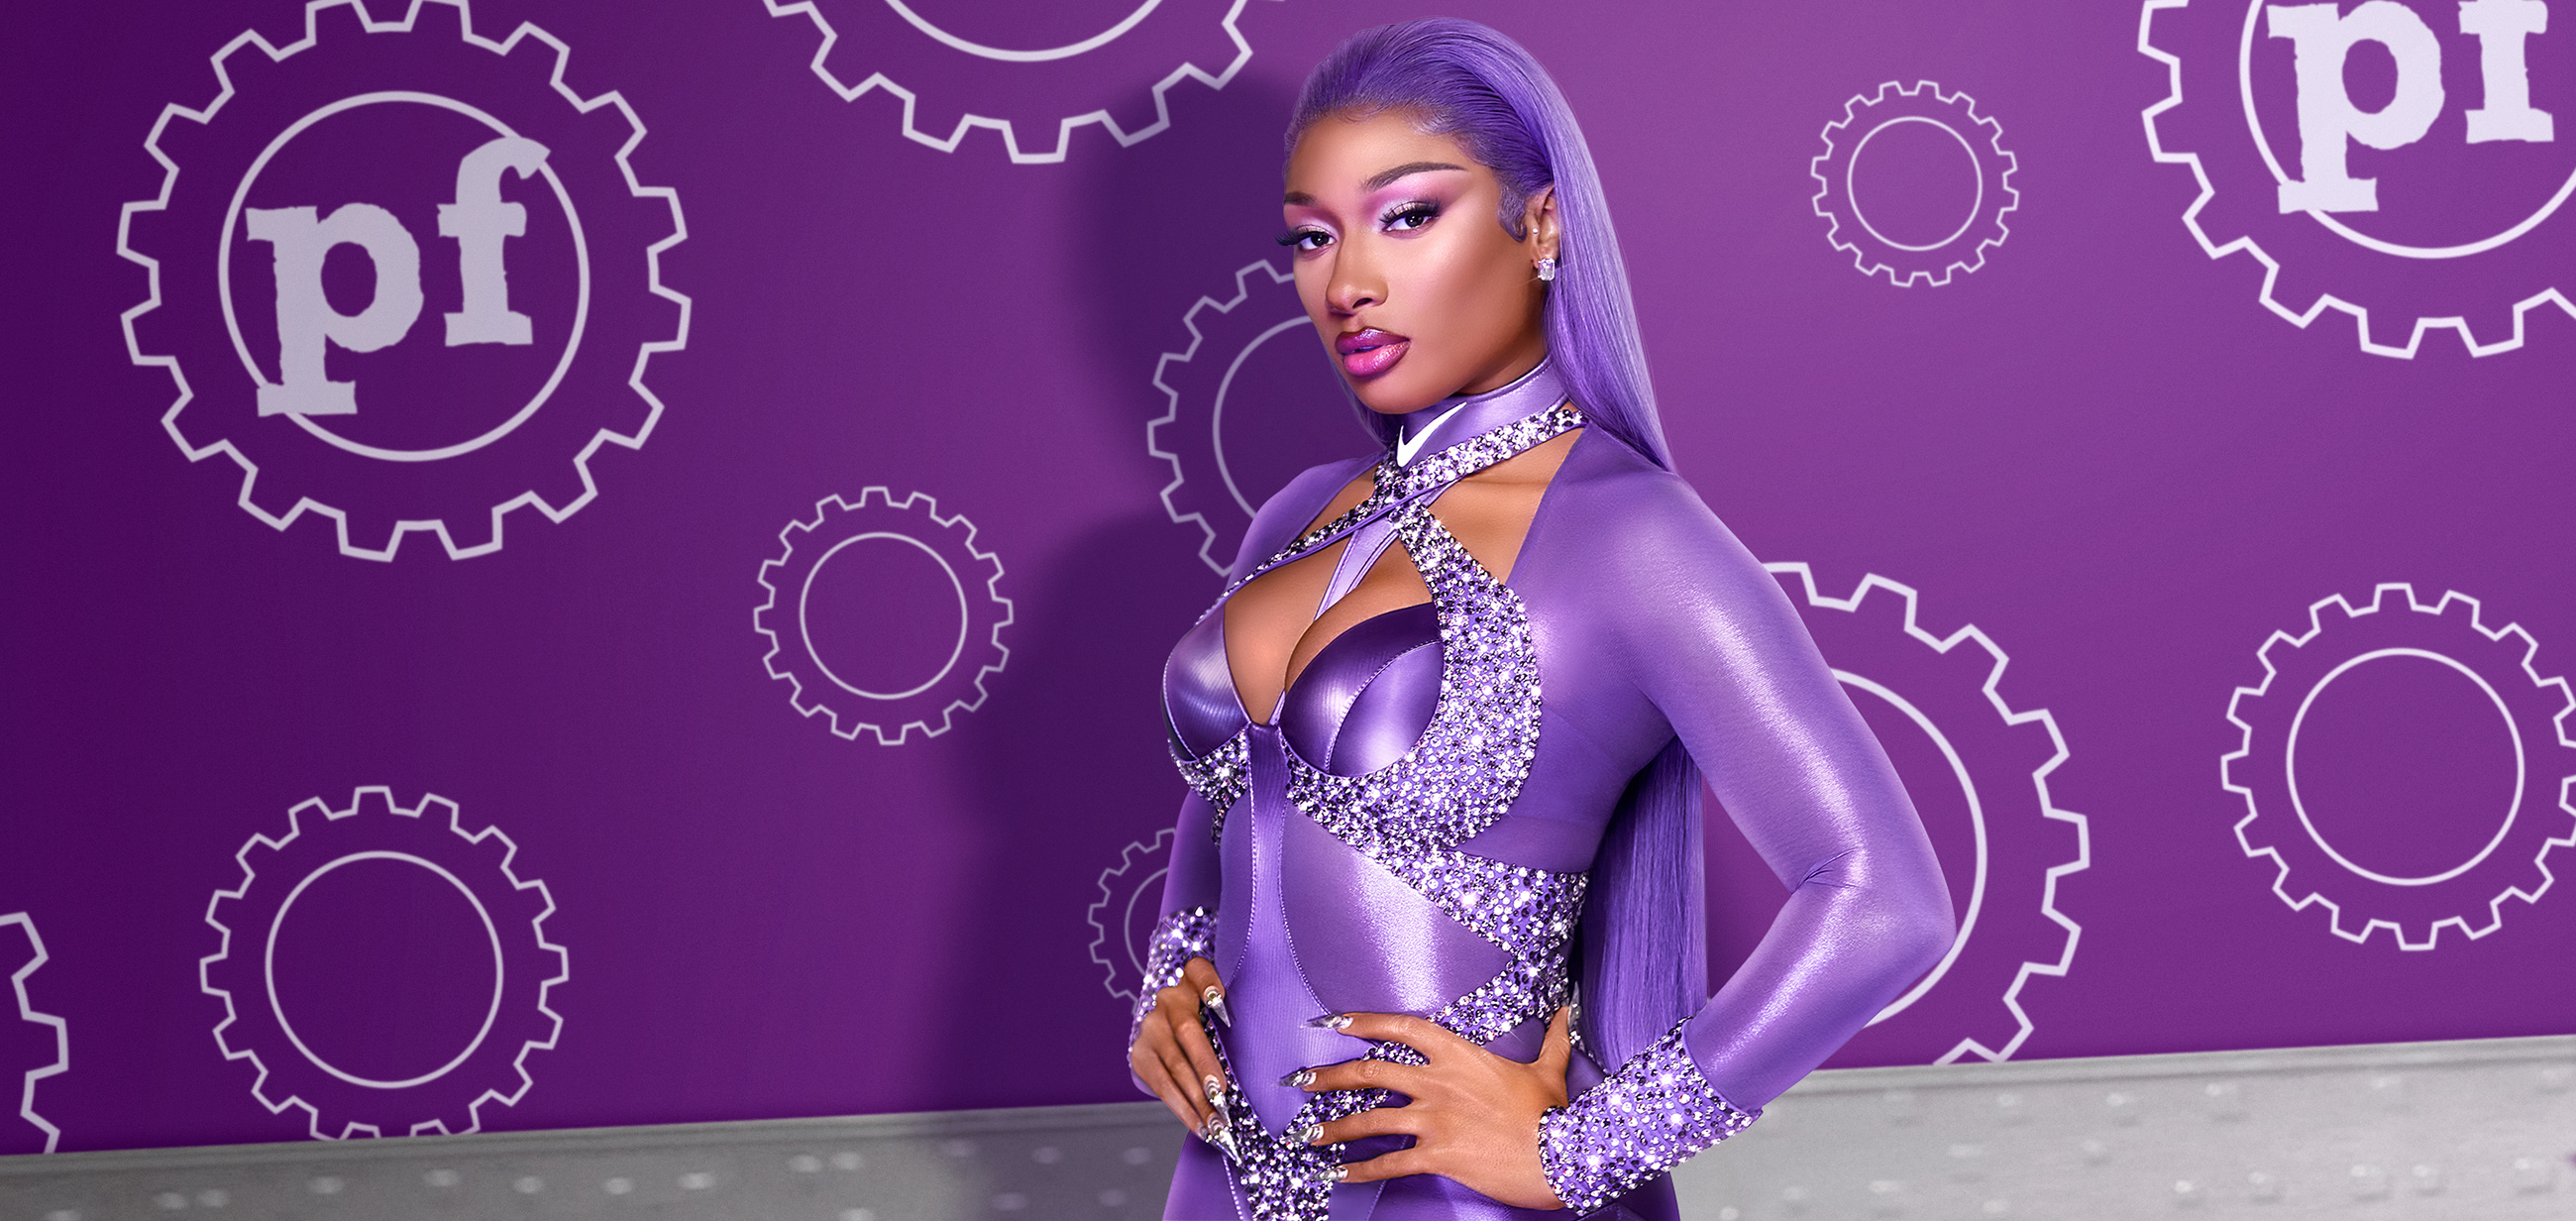 PLANET FITNESS DEBUTS EMPOWERING PARTNERSHIP WITH MEGAN THEE STALLION,  DUBBING HER AS 'MOTHER FITNESS' IN A DYNAMIC COLLABORATION FOR THE NEW YEAR